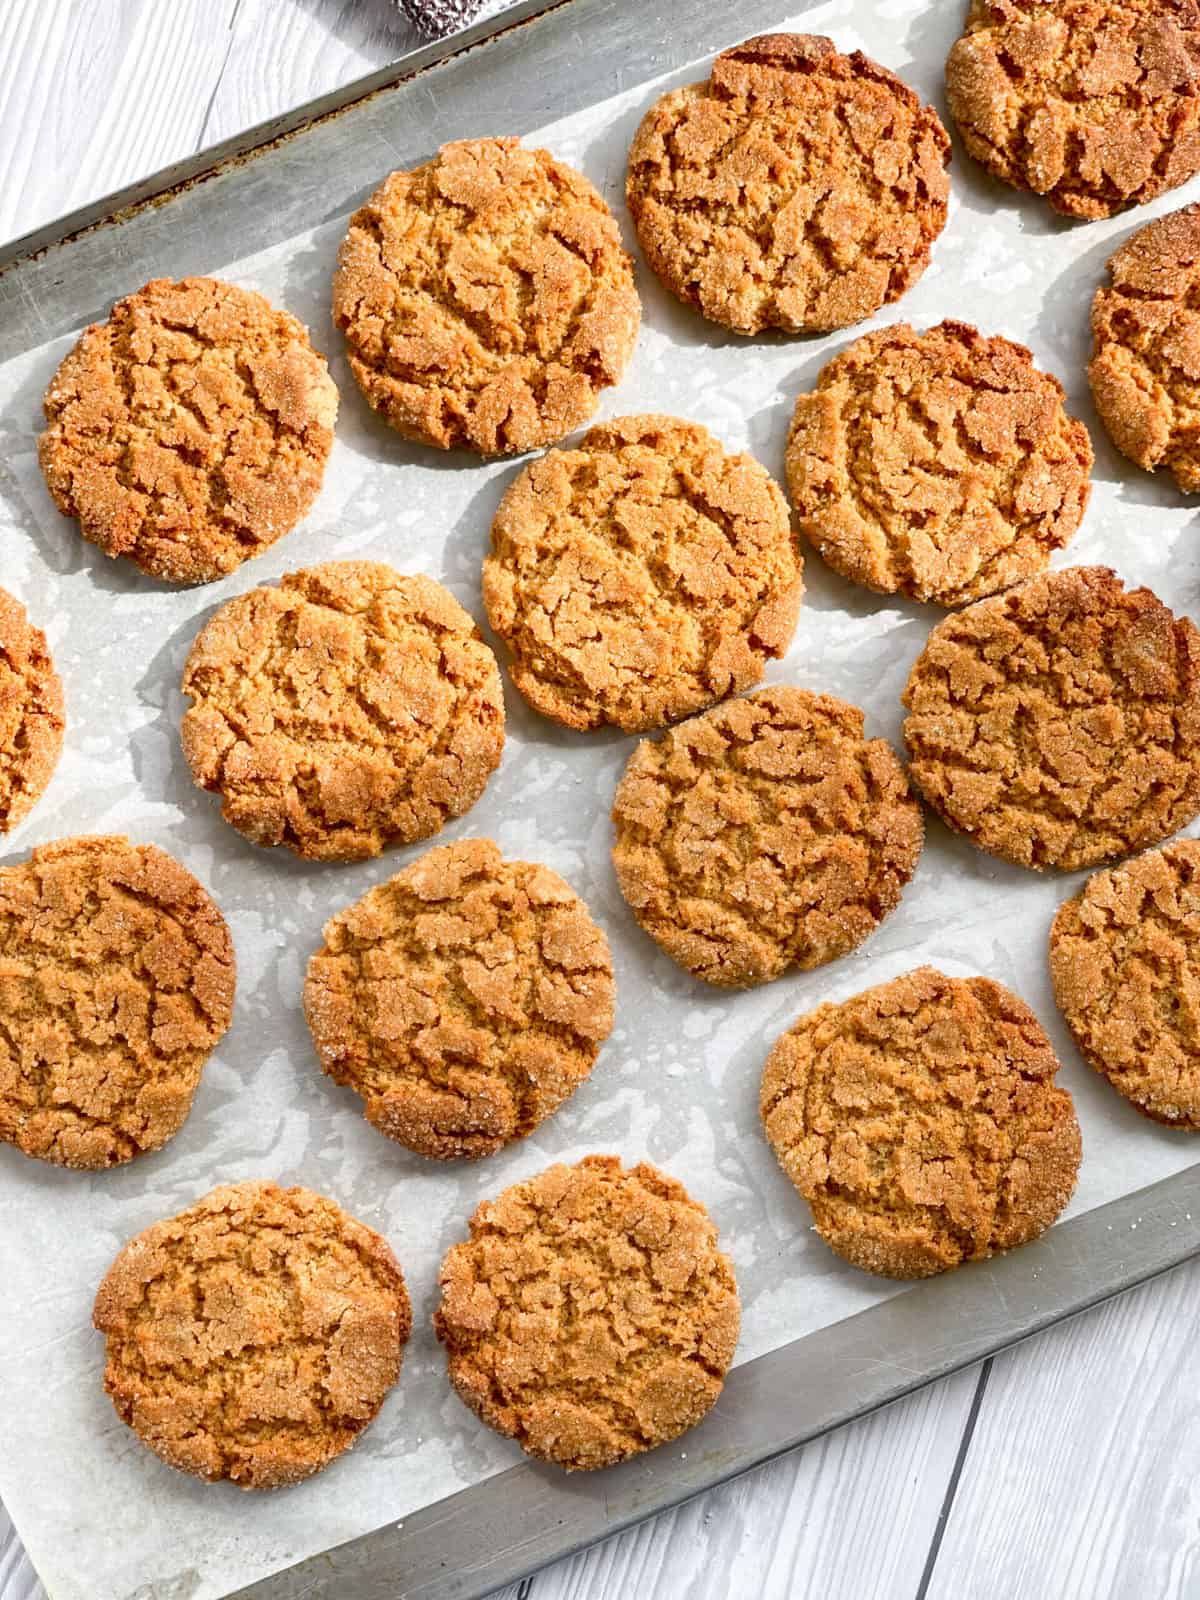 Warm Ginger biscuits baked to golden brown on a baking tray 